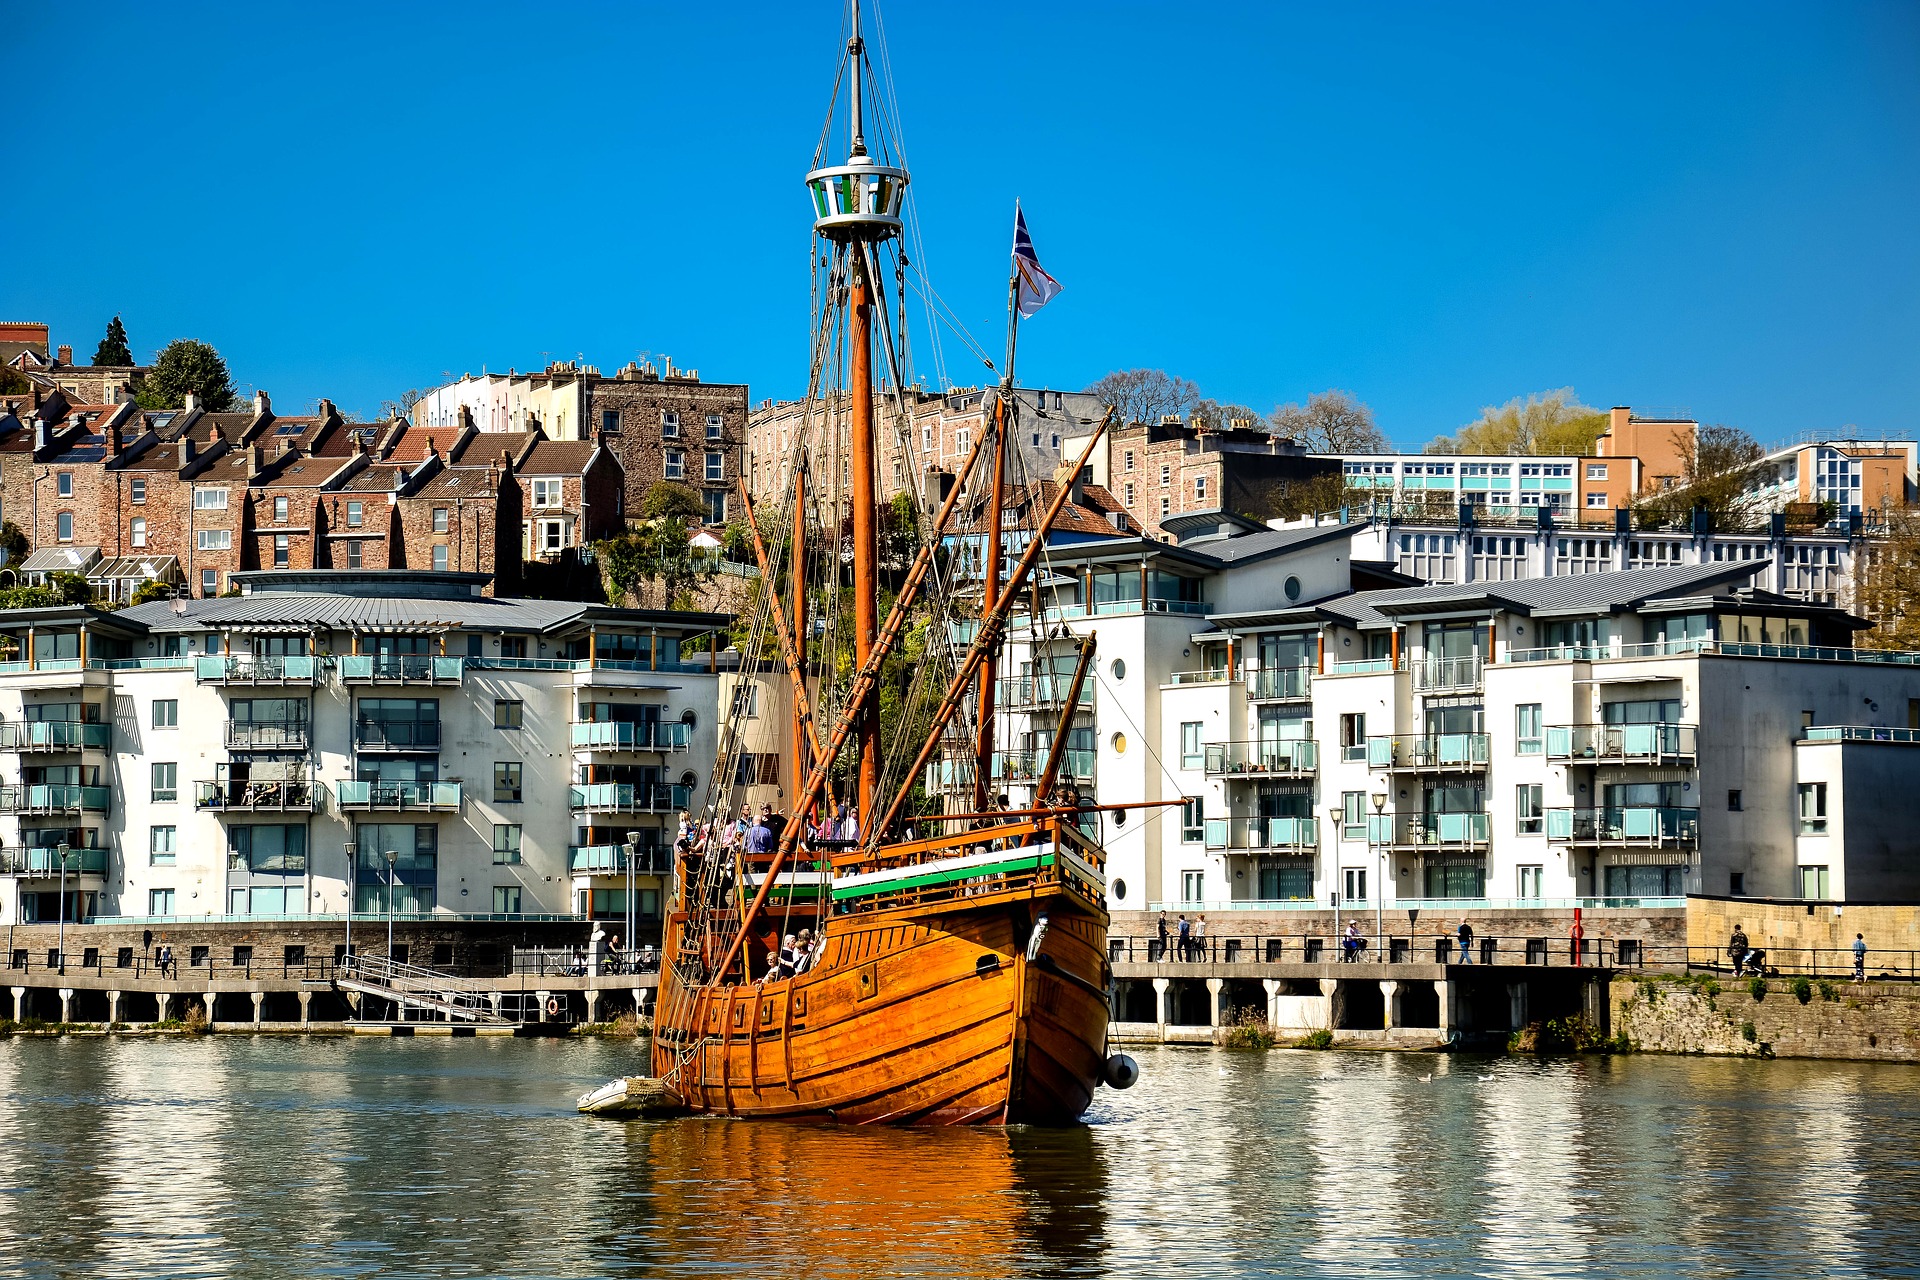 Bristol Harbor is a great day trip from London.